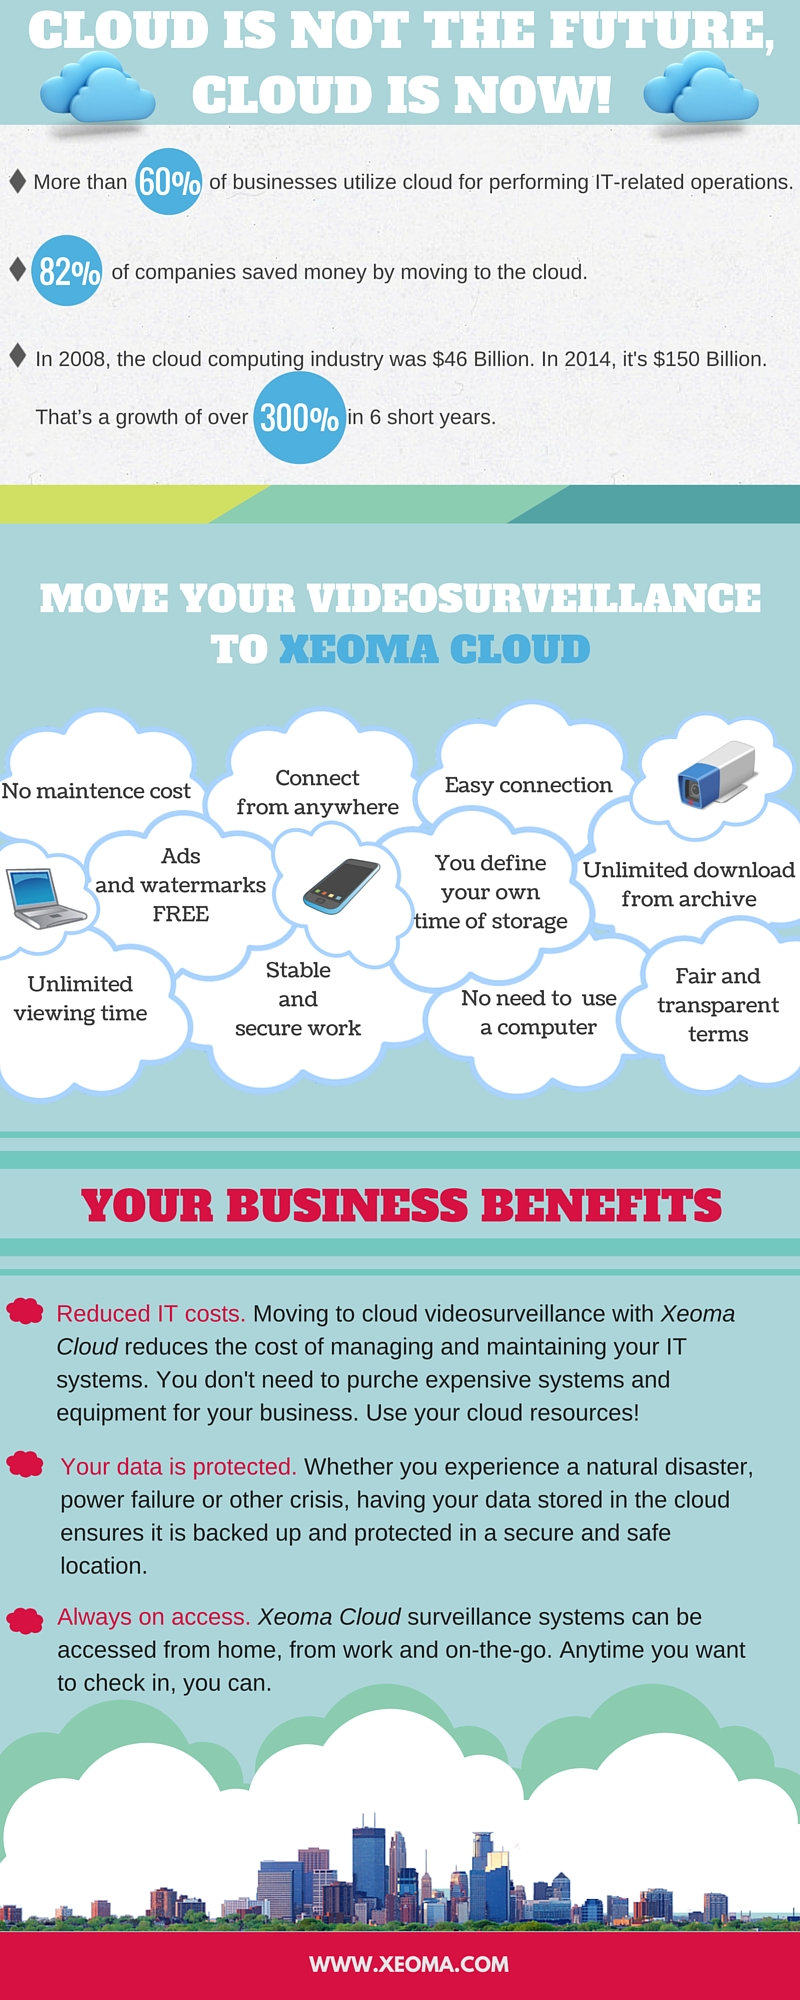 How does the cloud work for your business